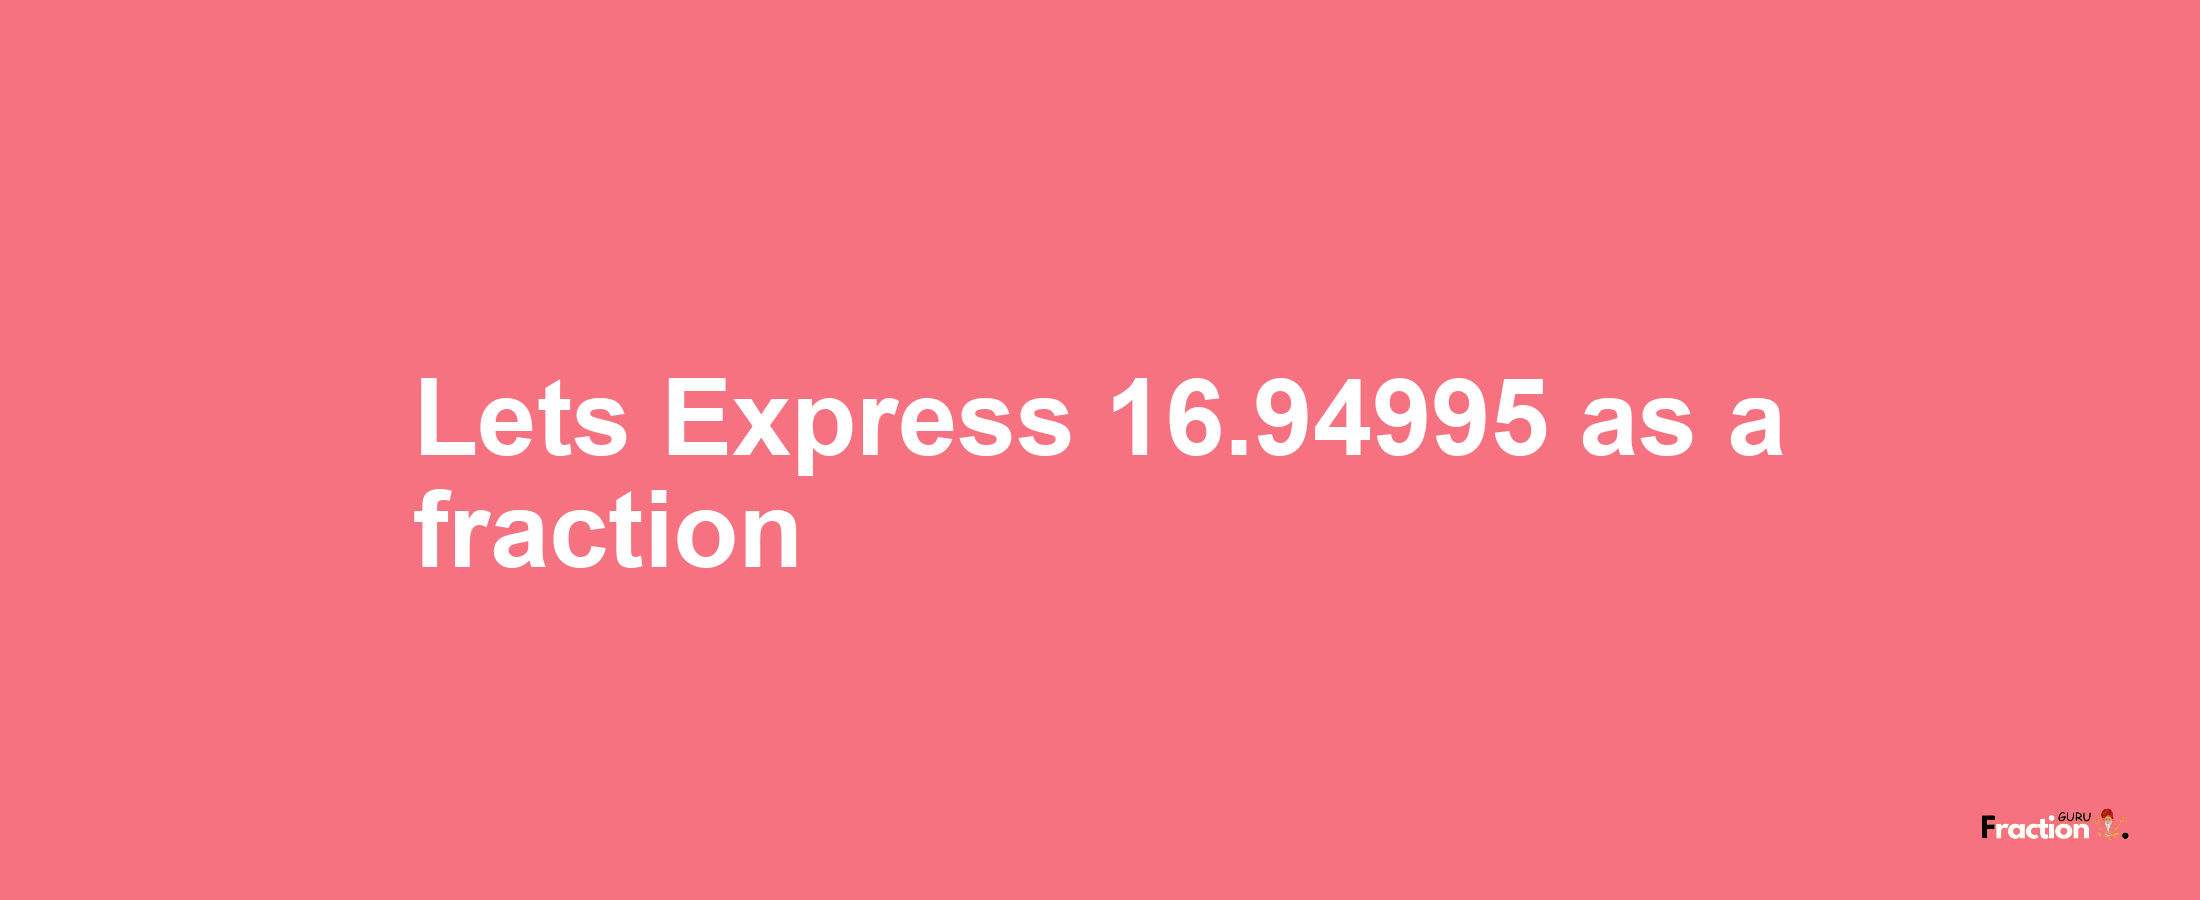 Lets Express 16.94995 as afraction